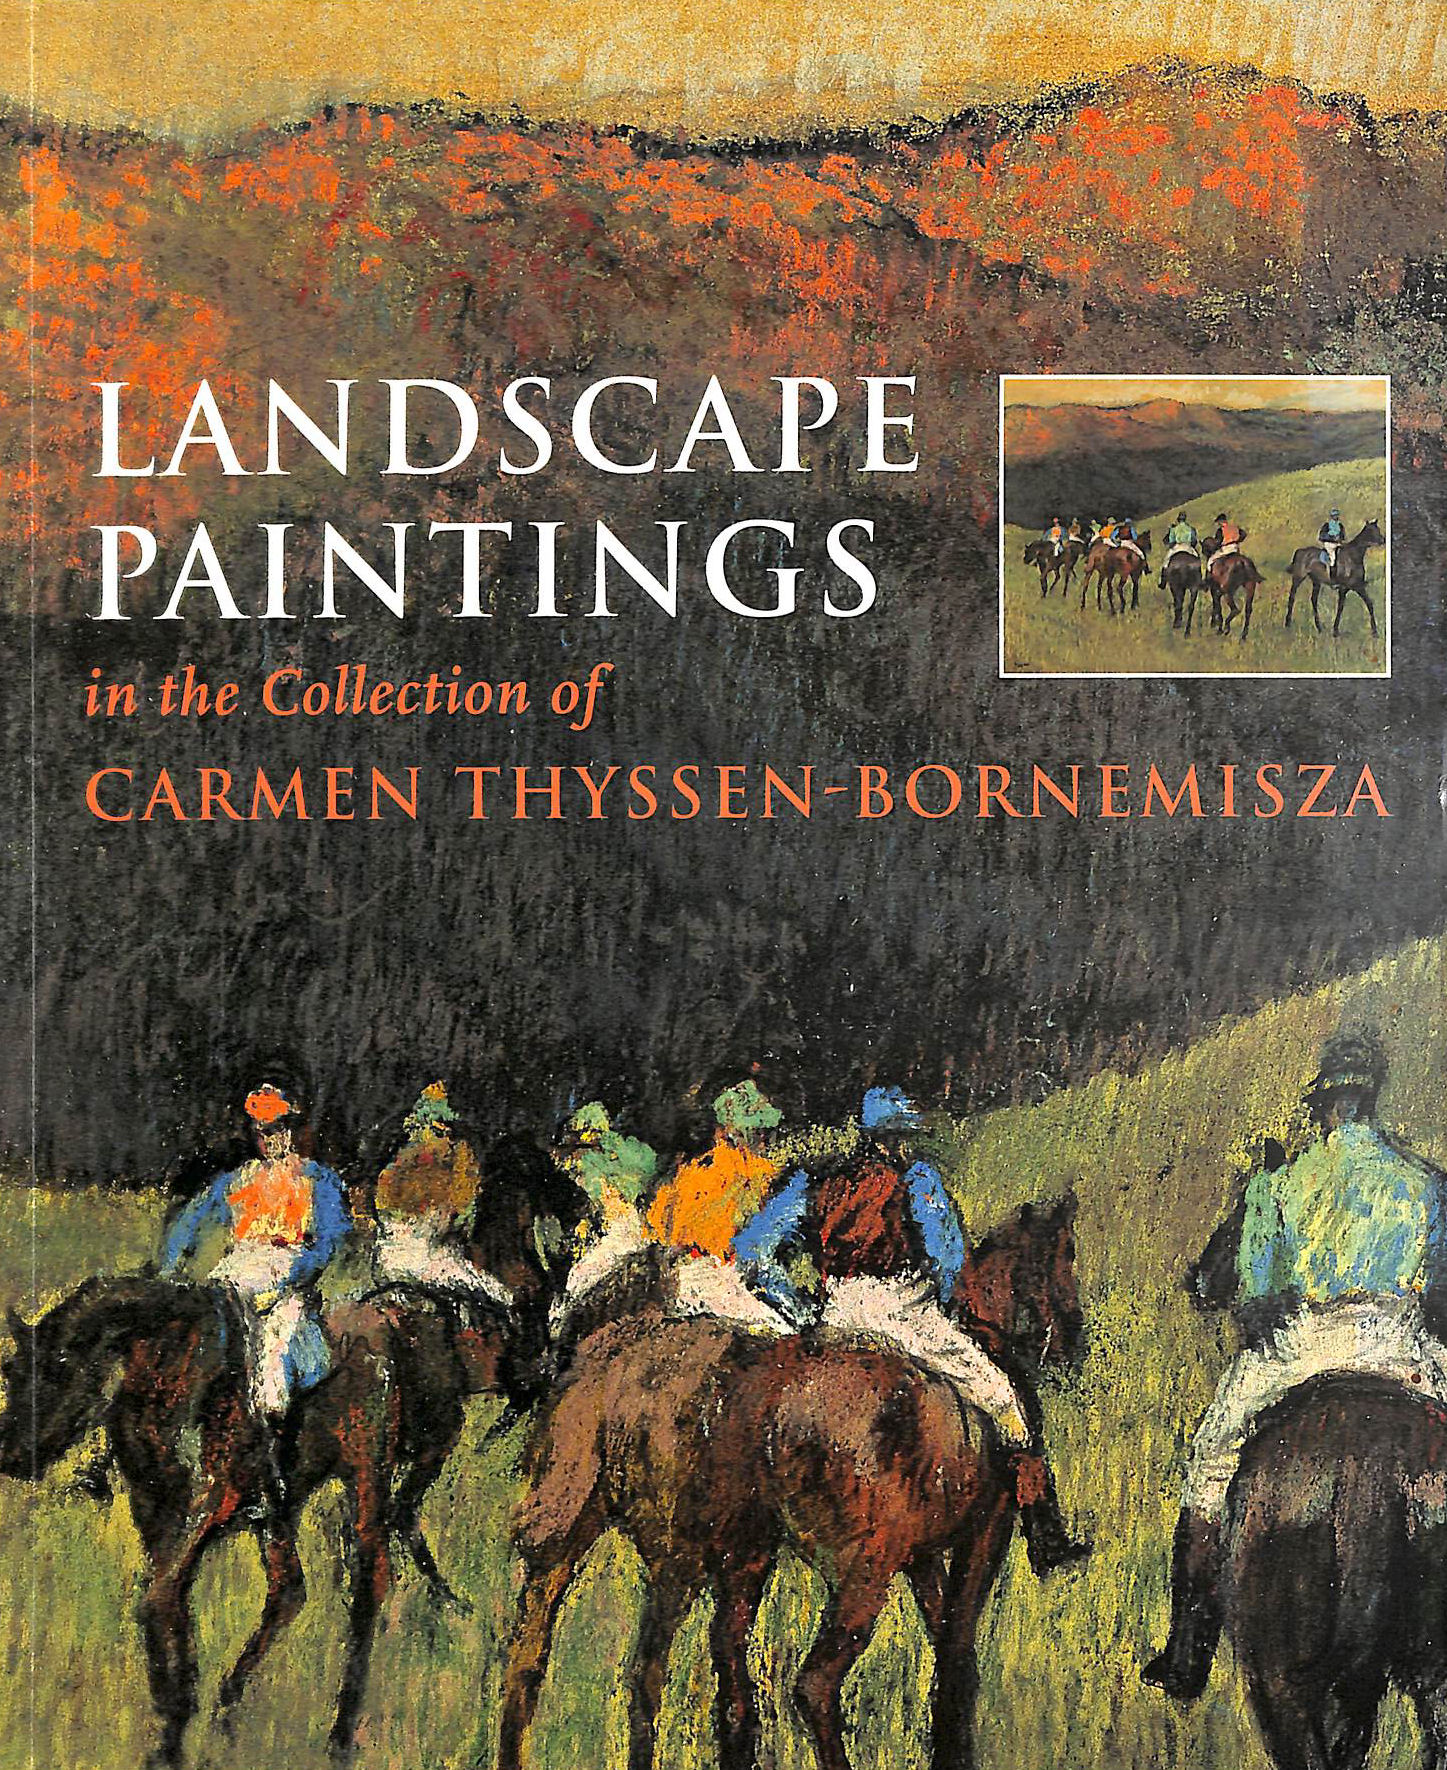 GUILLERMO SOLANA - Landscape Paintings in the Collection of Carmen Thyssen-Bornemisza